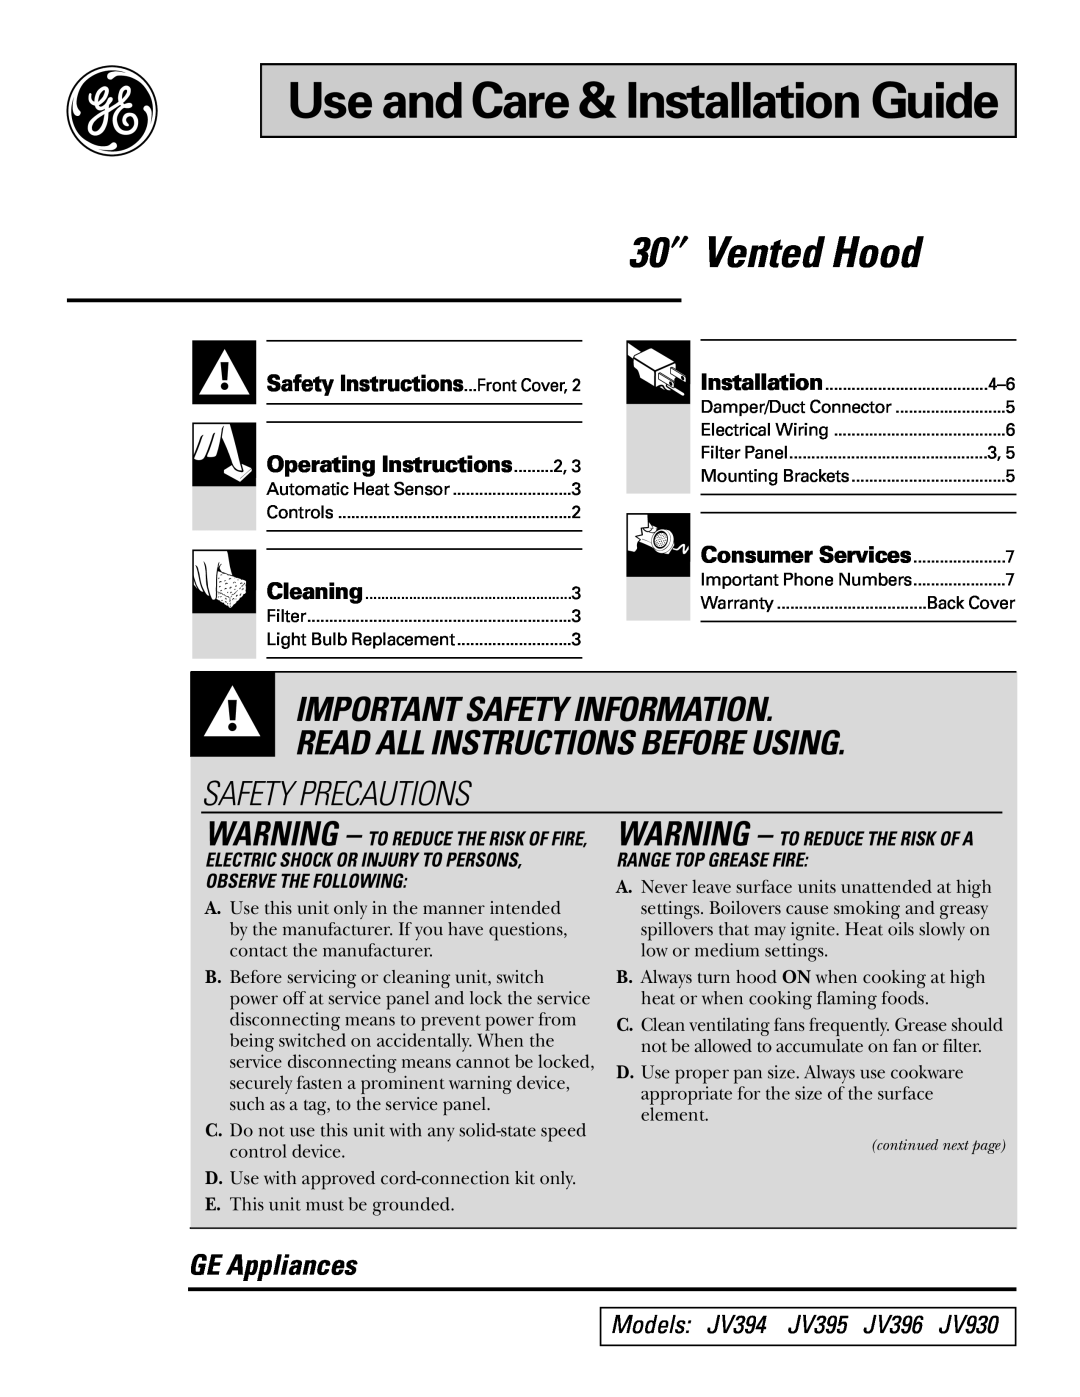 GE JV396 operating instructions Safety Precautions, Important Safety Information. Read All Instructions Before Using 